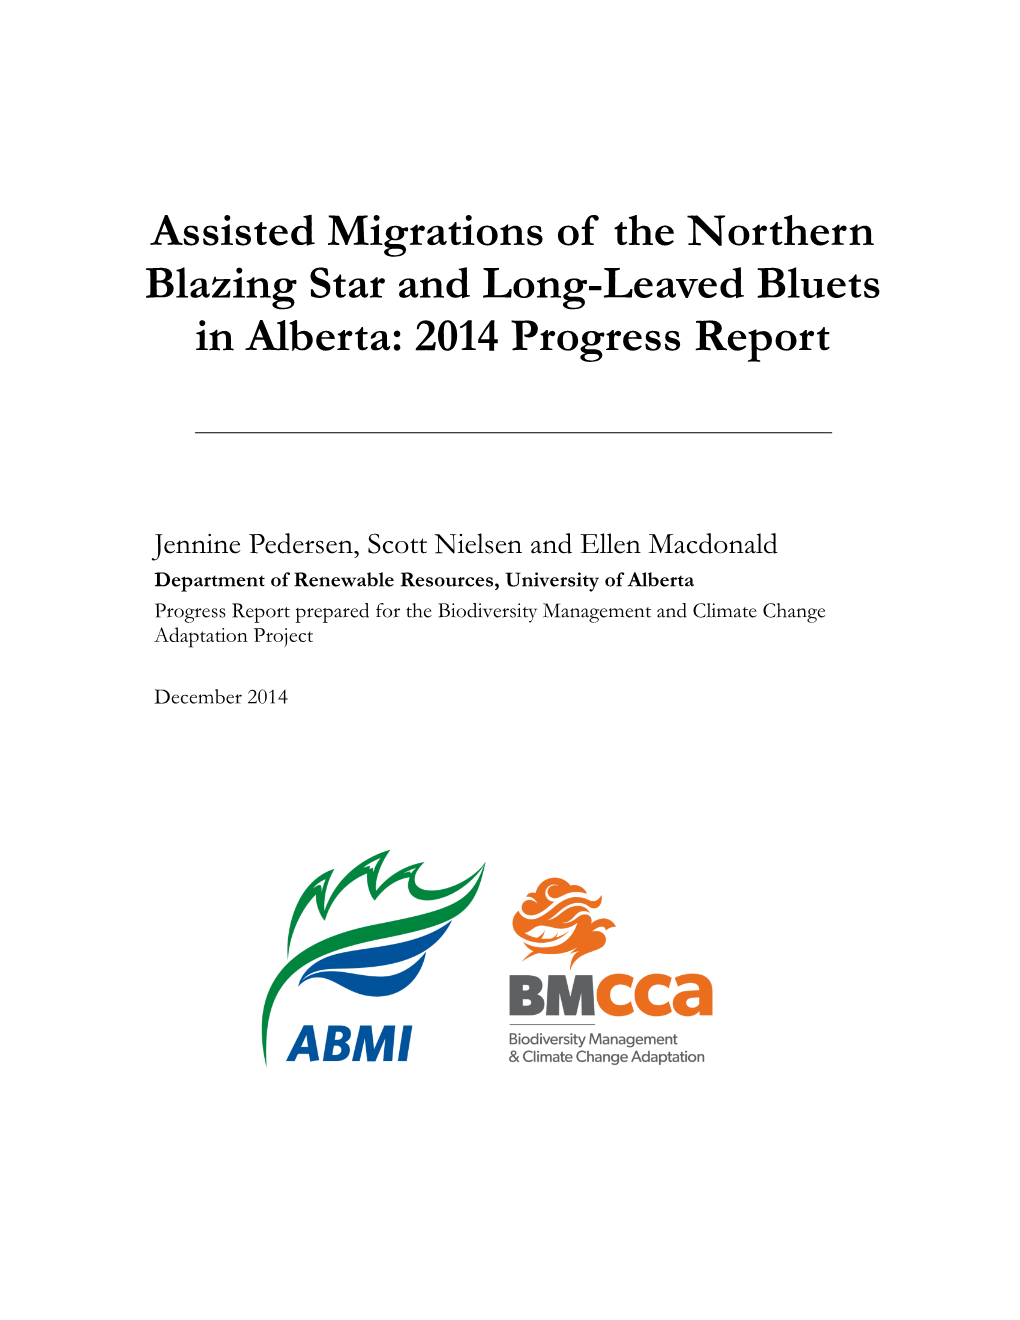 Assisted Migrations of the Northern Blazing Star and Long-Leaved Bluets in Alberta: 2014 Progress Report